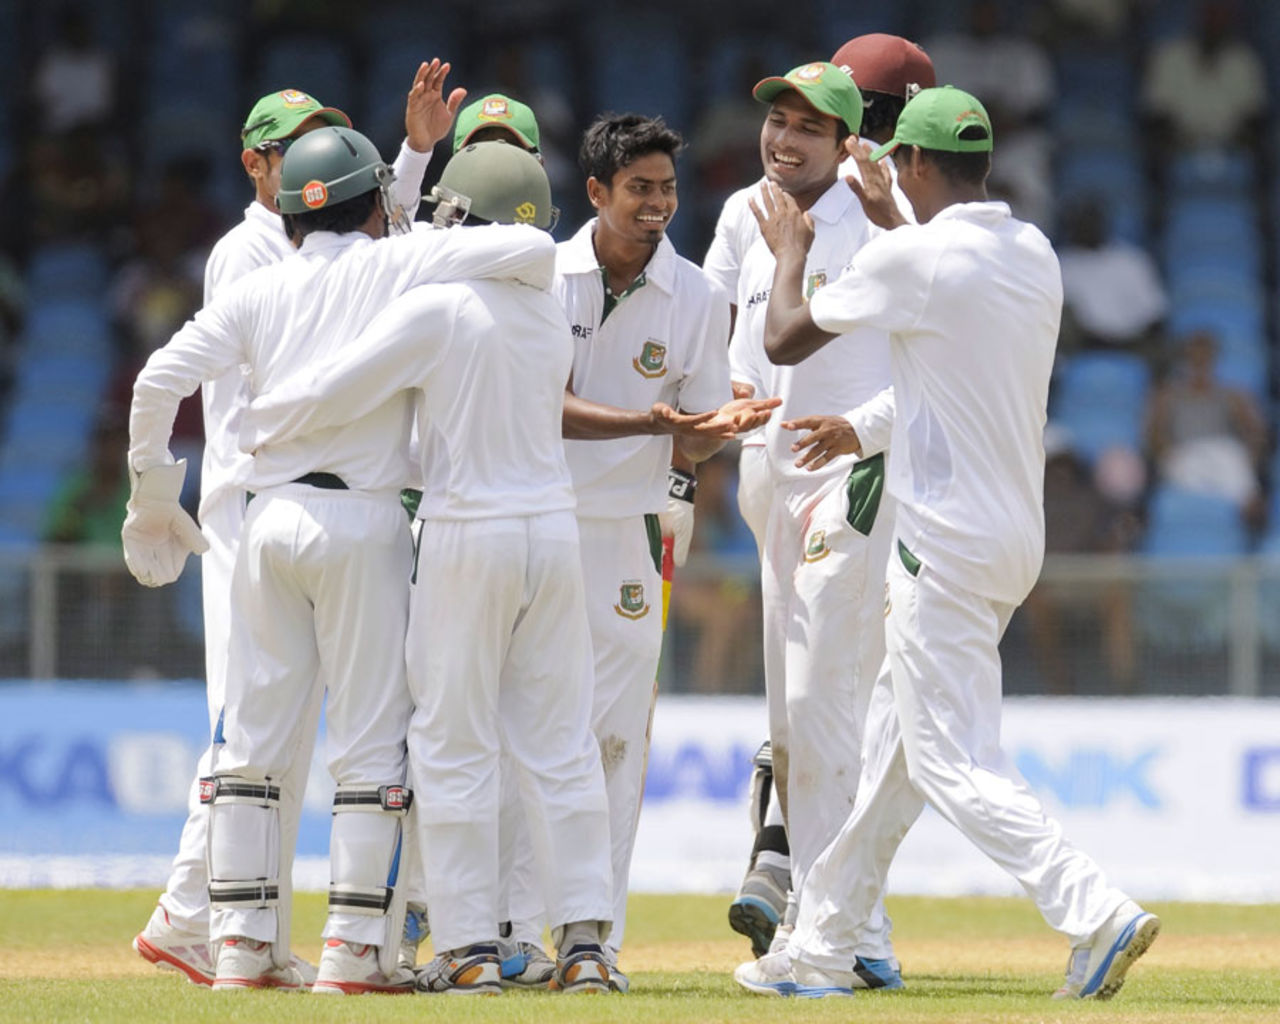 Taijul Islam impressed with his control of flight, West Indies v Bangladesh, 1st Test, St Vincent, 1st day, September 5, 2014